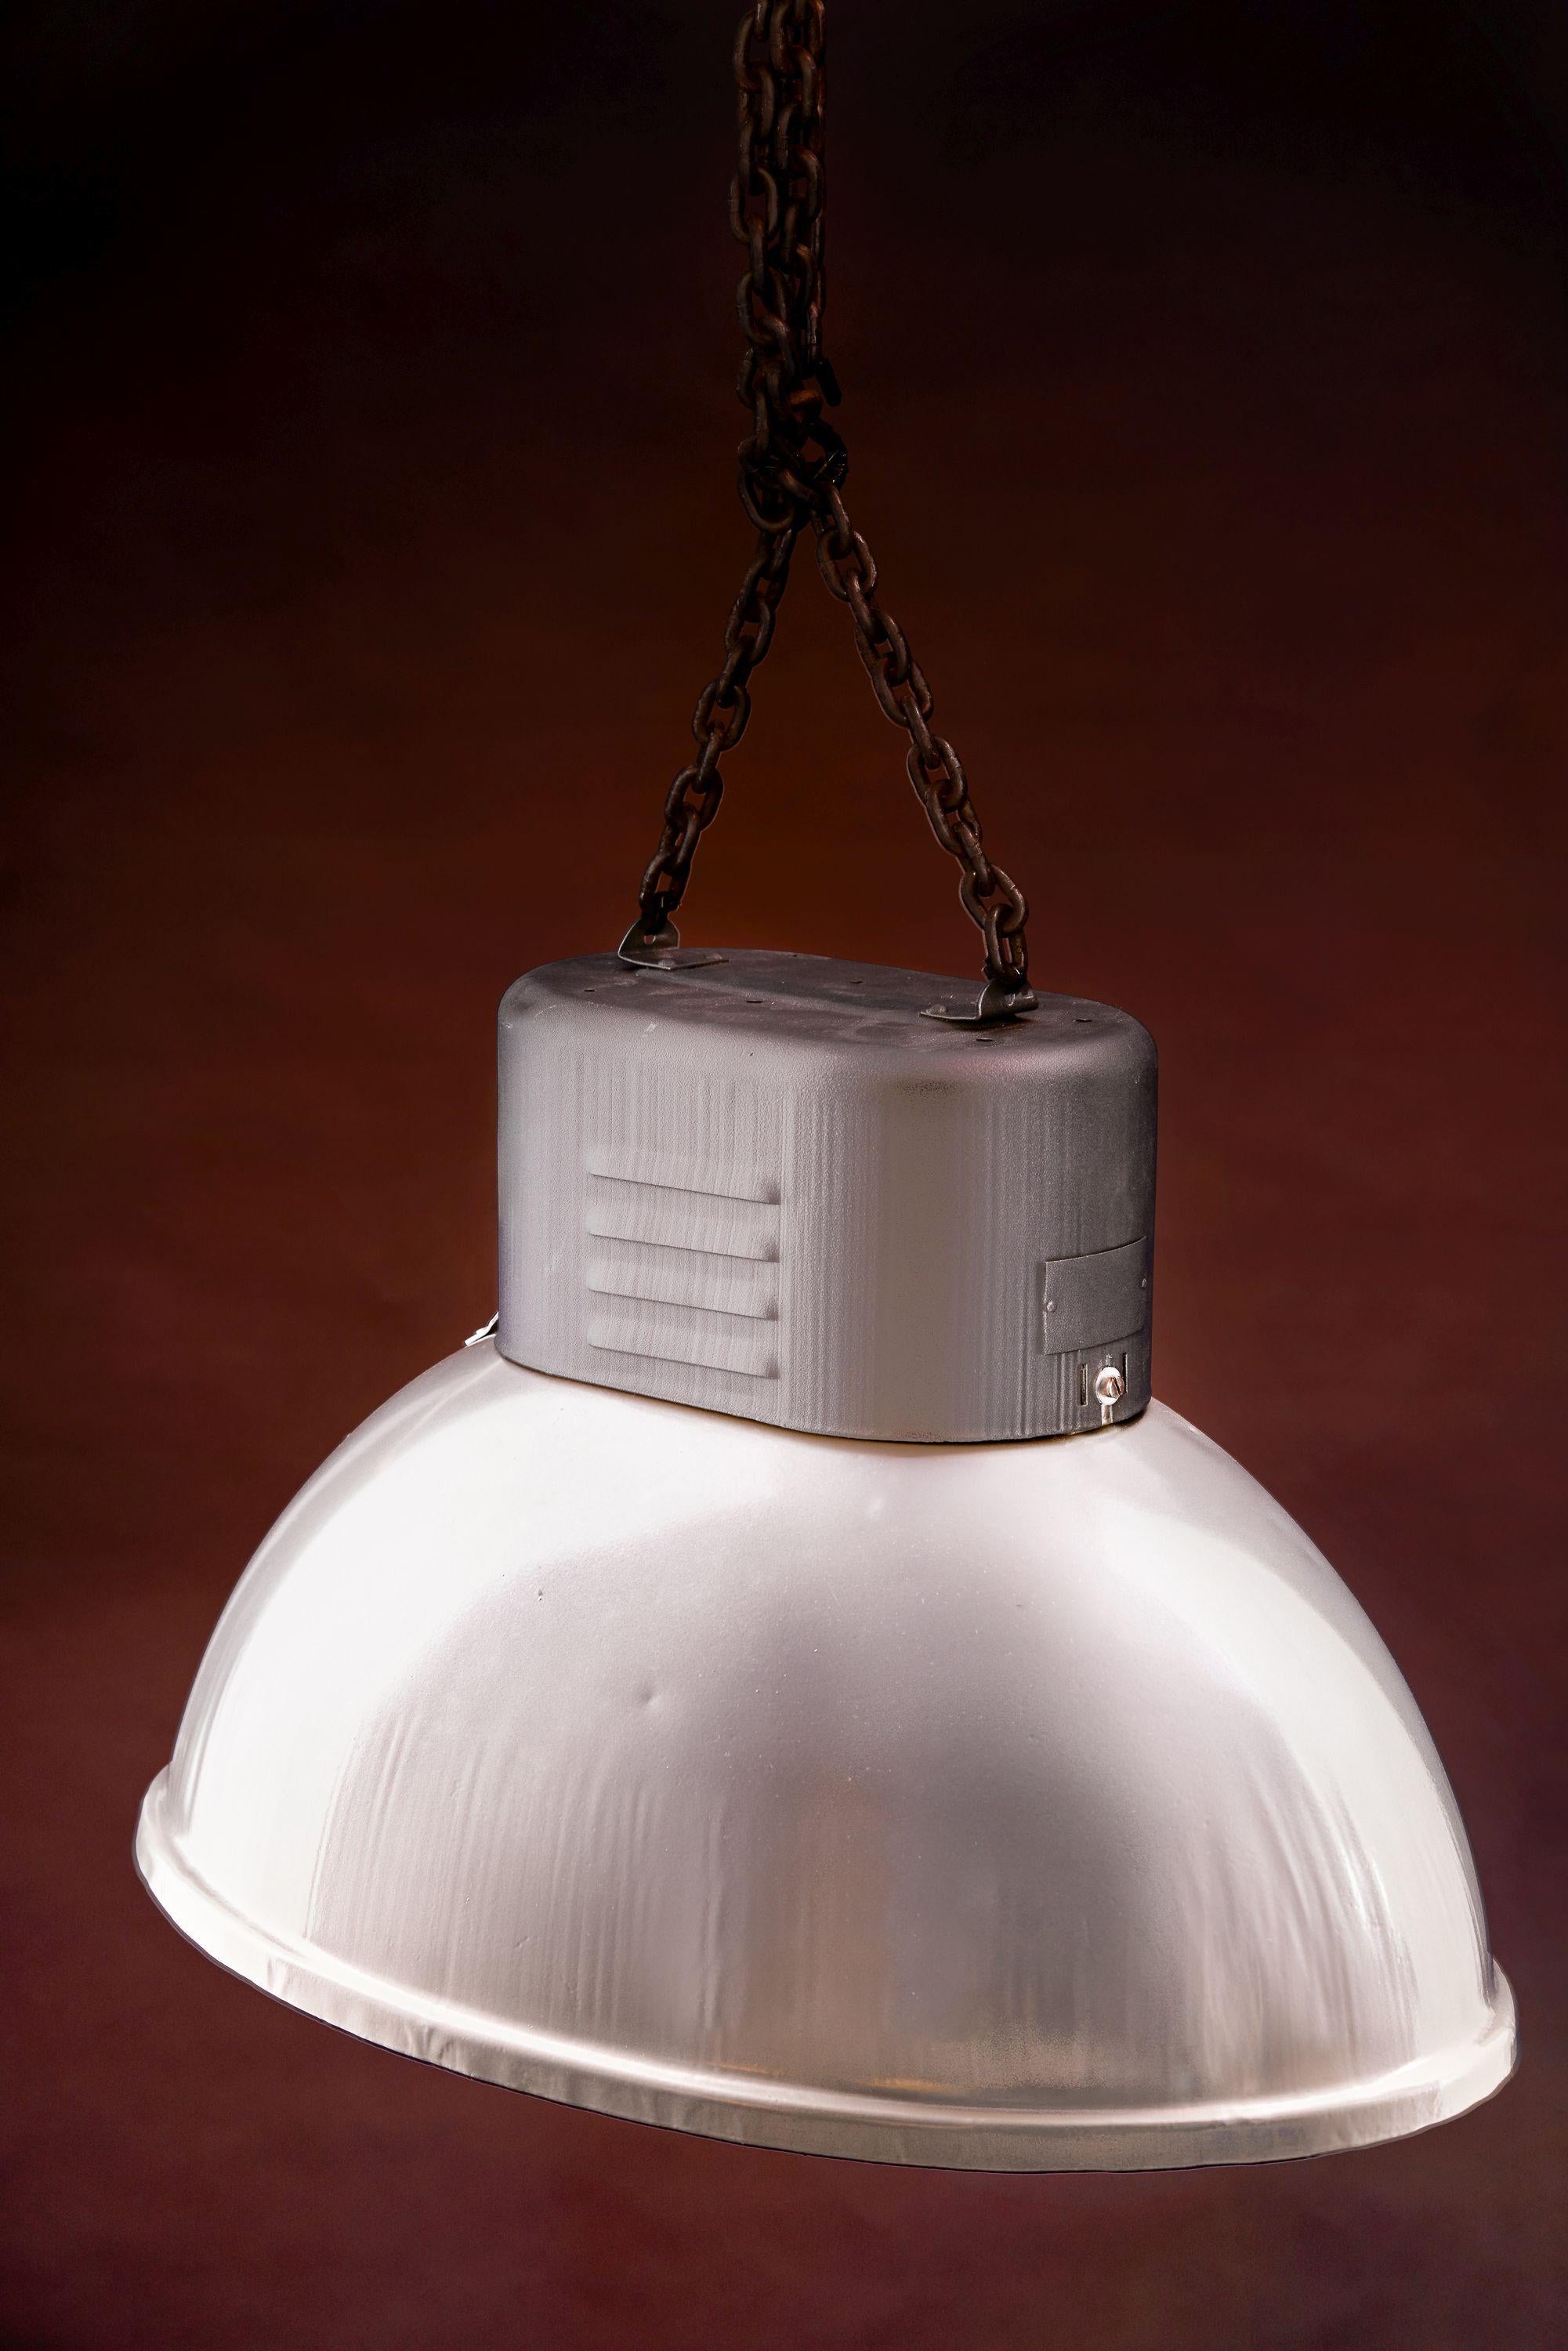 Primary use:

High-pressure mercury lamp ORP-2 was designed to illuminate high factory halls, warehouses, stations and other industrial spaces where there was no excessive dust or air humidity.

Produced by: Mesko Zaklady Metalowe, Armii Ludowej